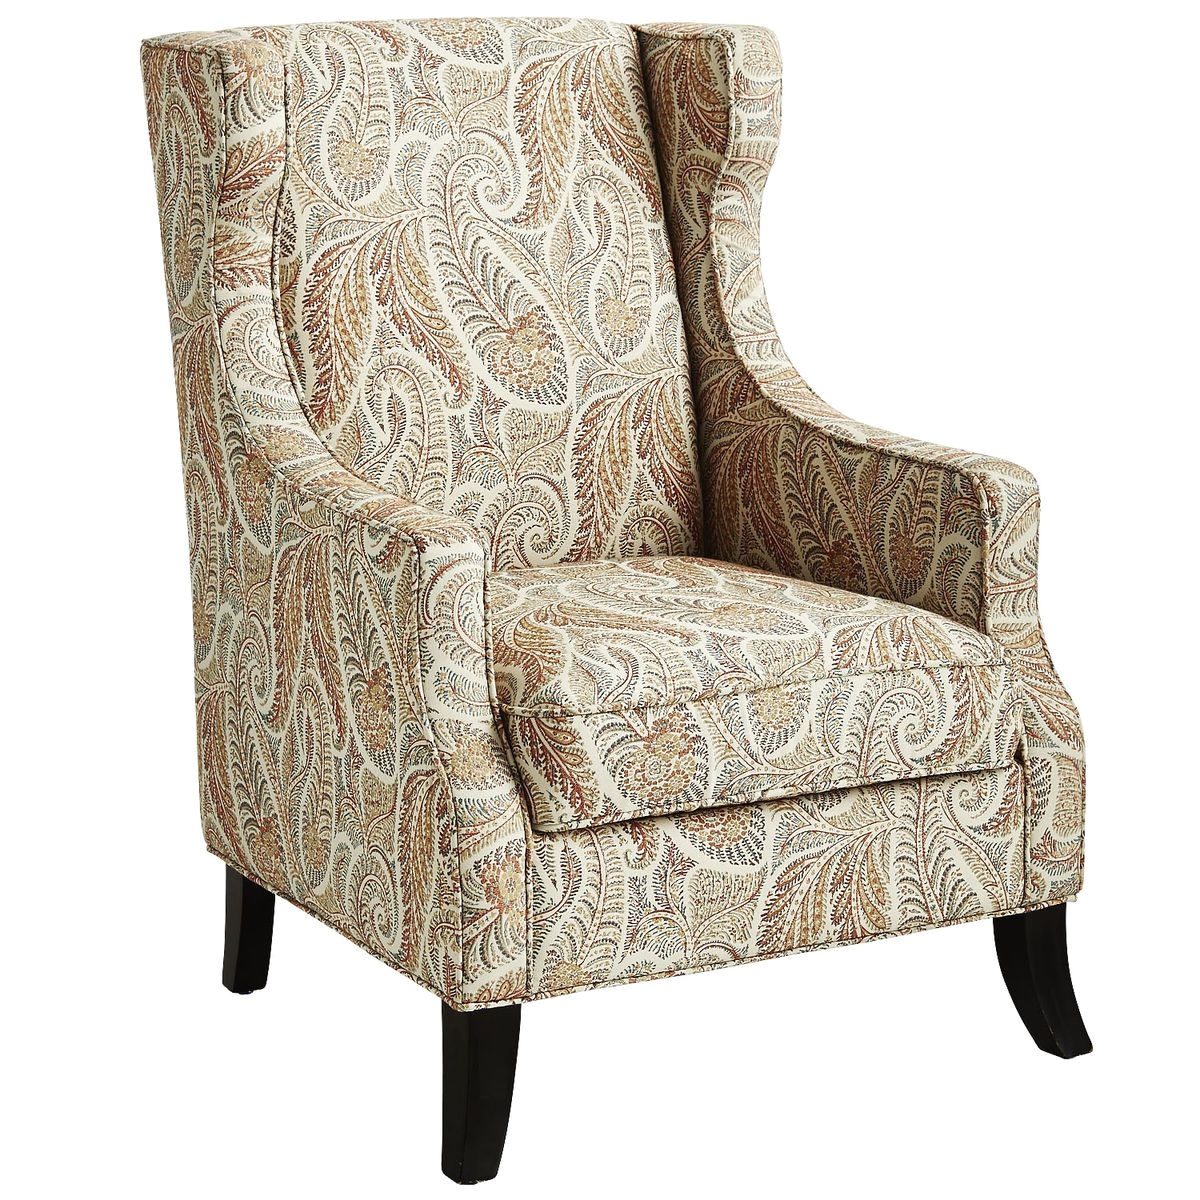 Pier One Swivel Chair Alec Sunset Paisley Wing Chair Central Heating Chair Fabric and